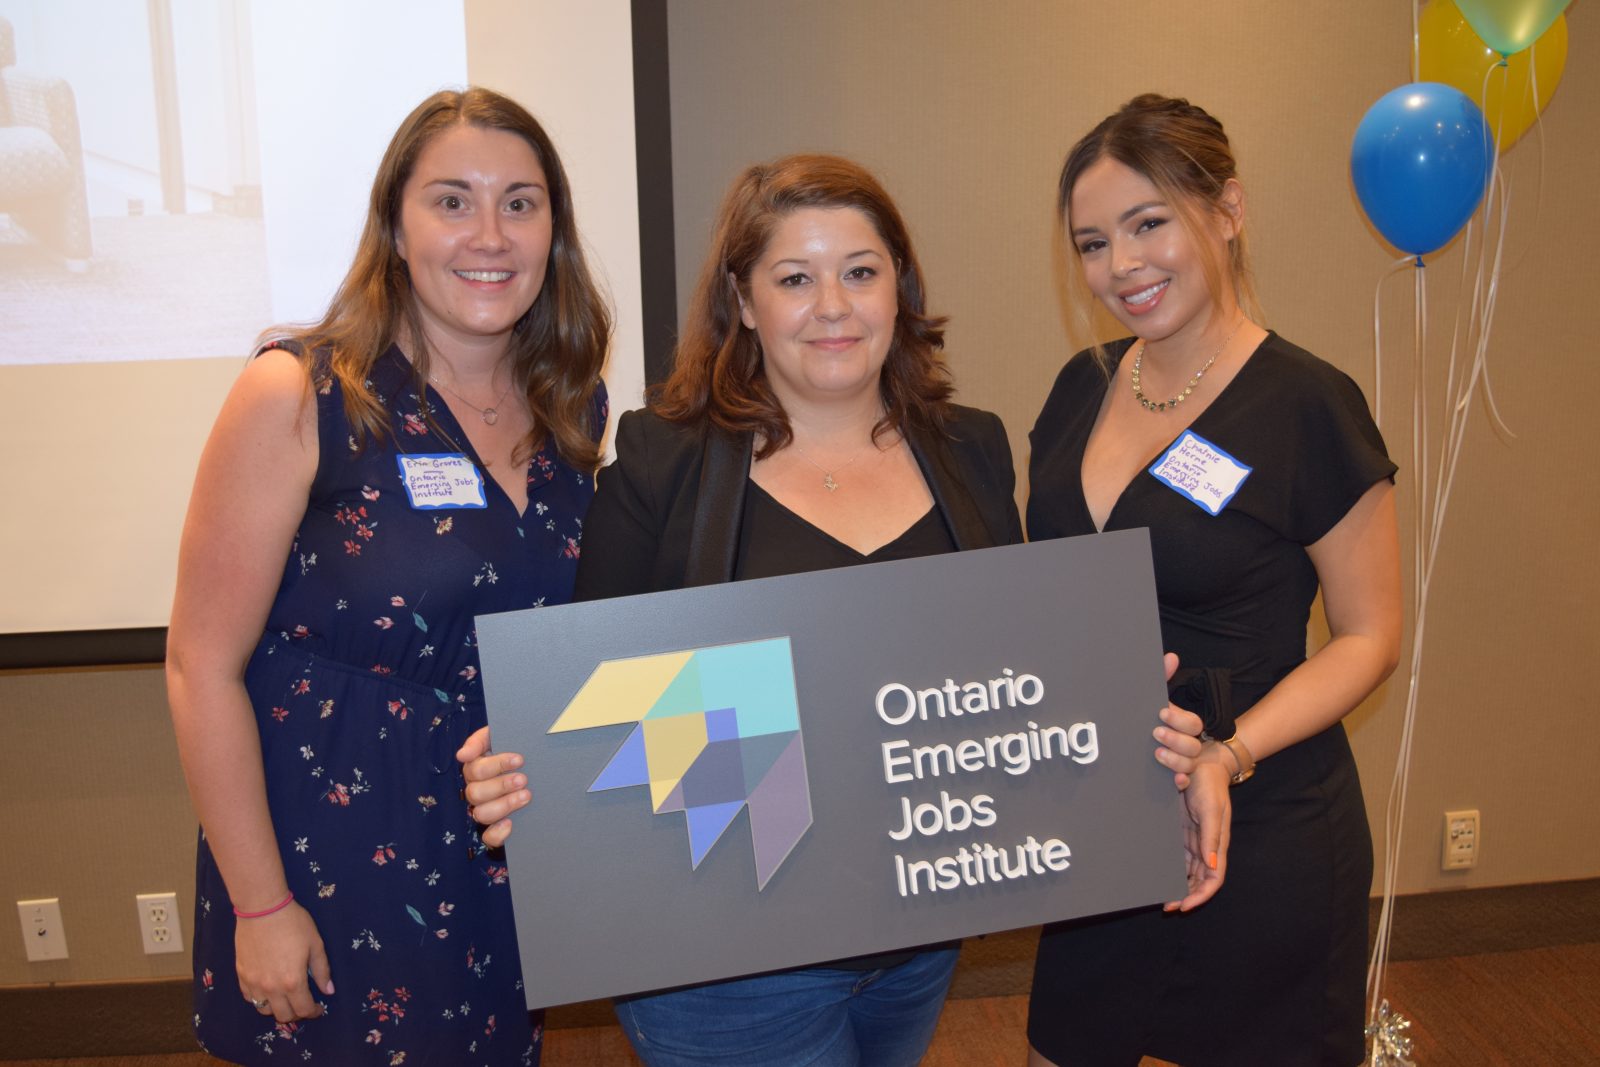 The Ontario Emerging Jobs Institute Launches in Cornwall